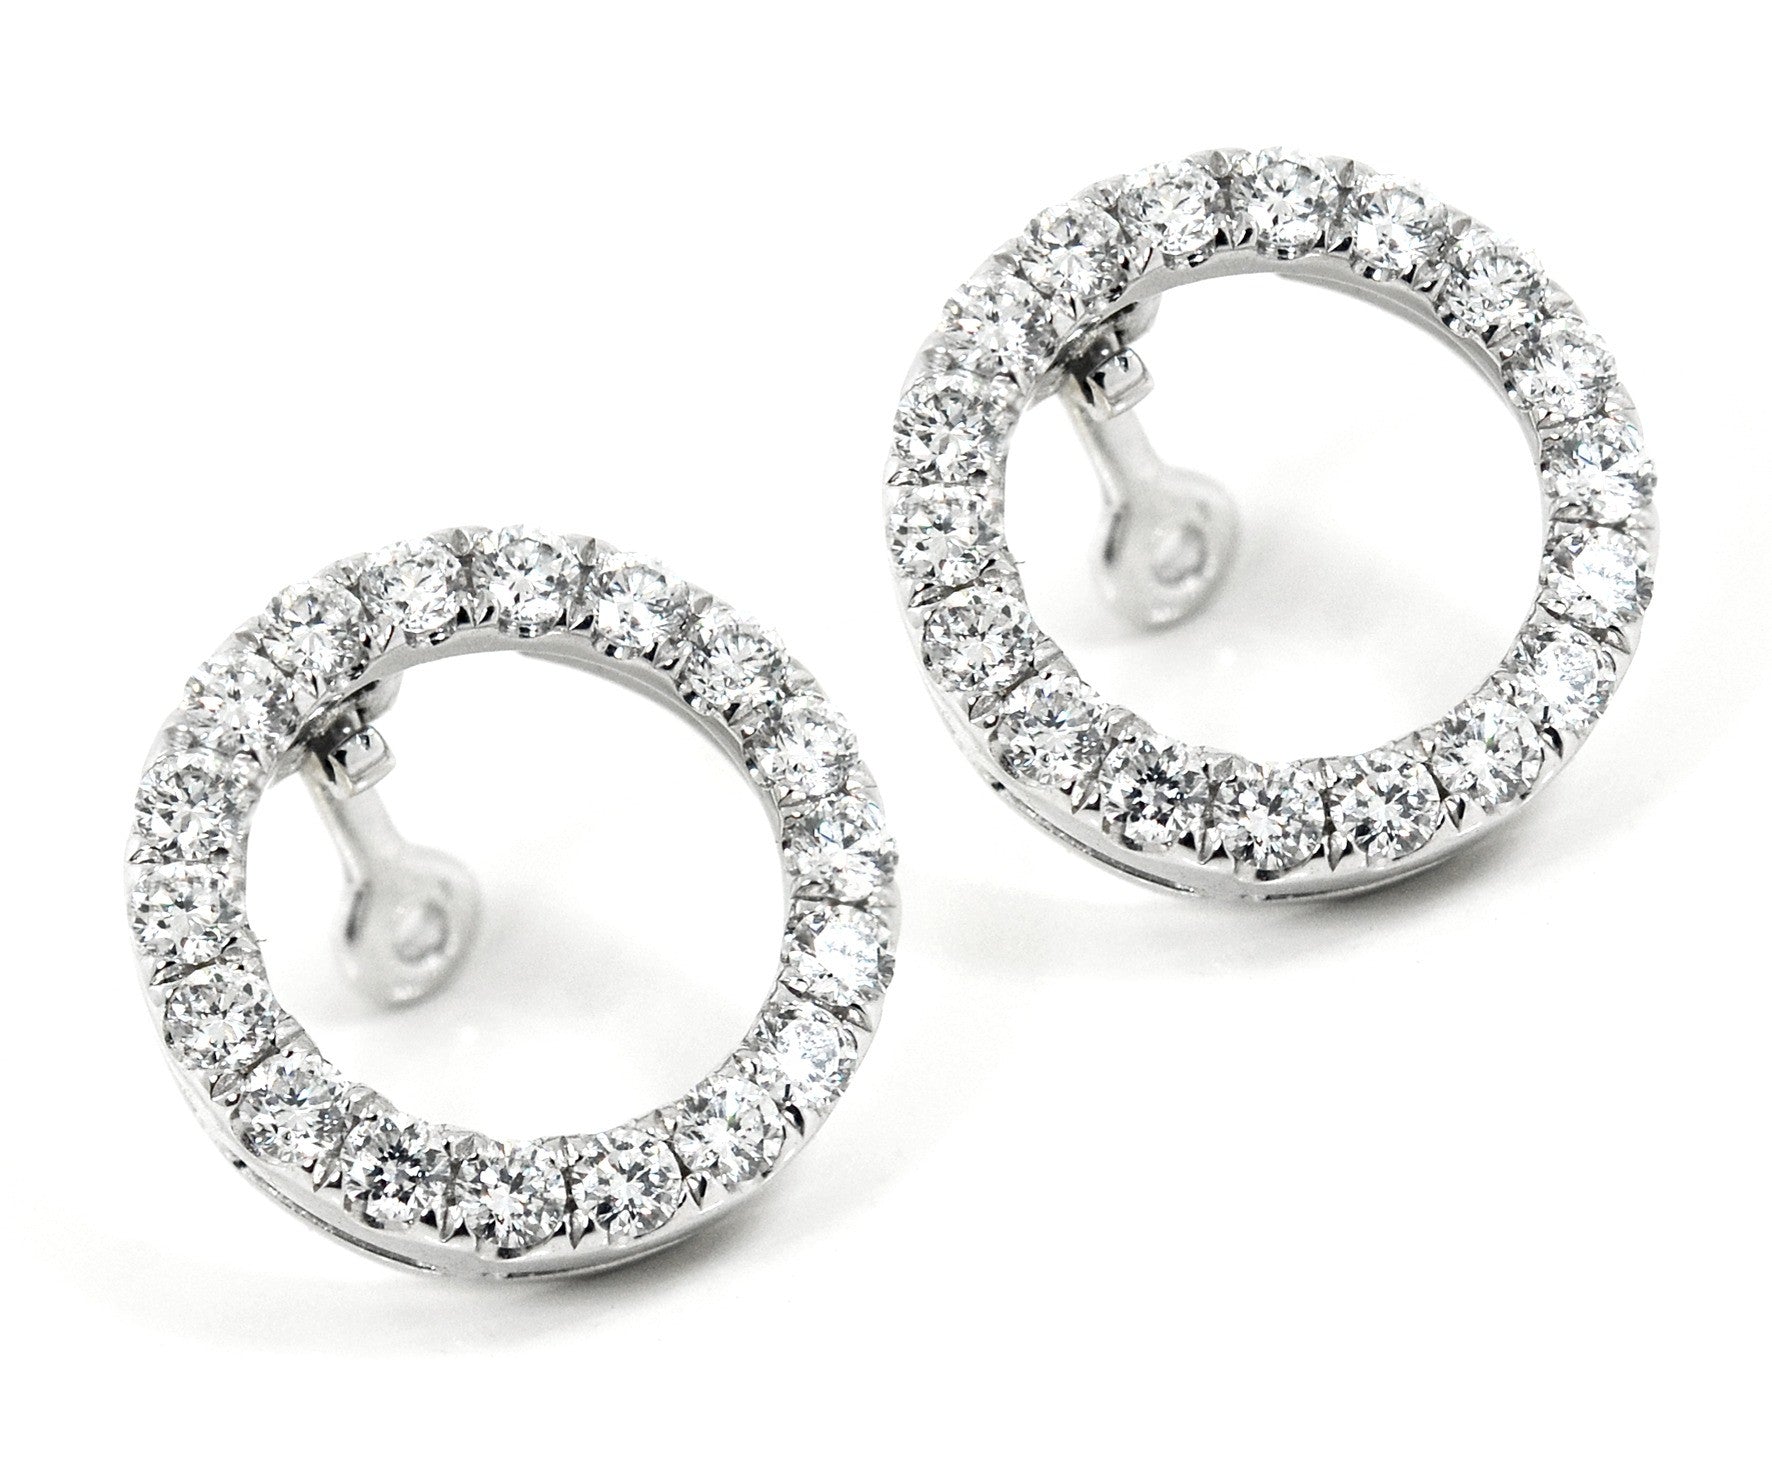 18ct White gold diamond halo attachment for most stud earrings - ForeverJewels Design Studio 8